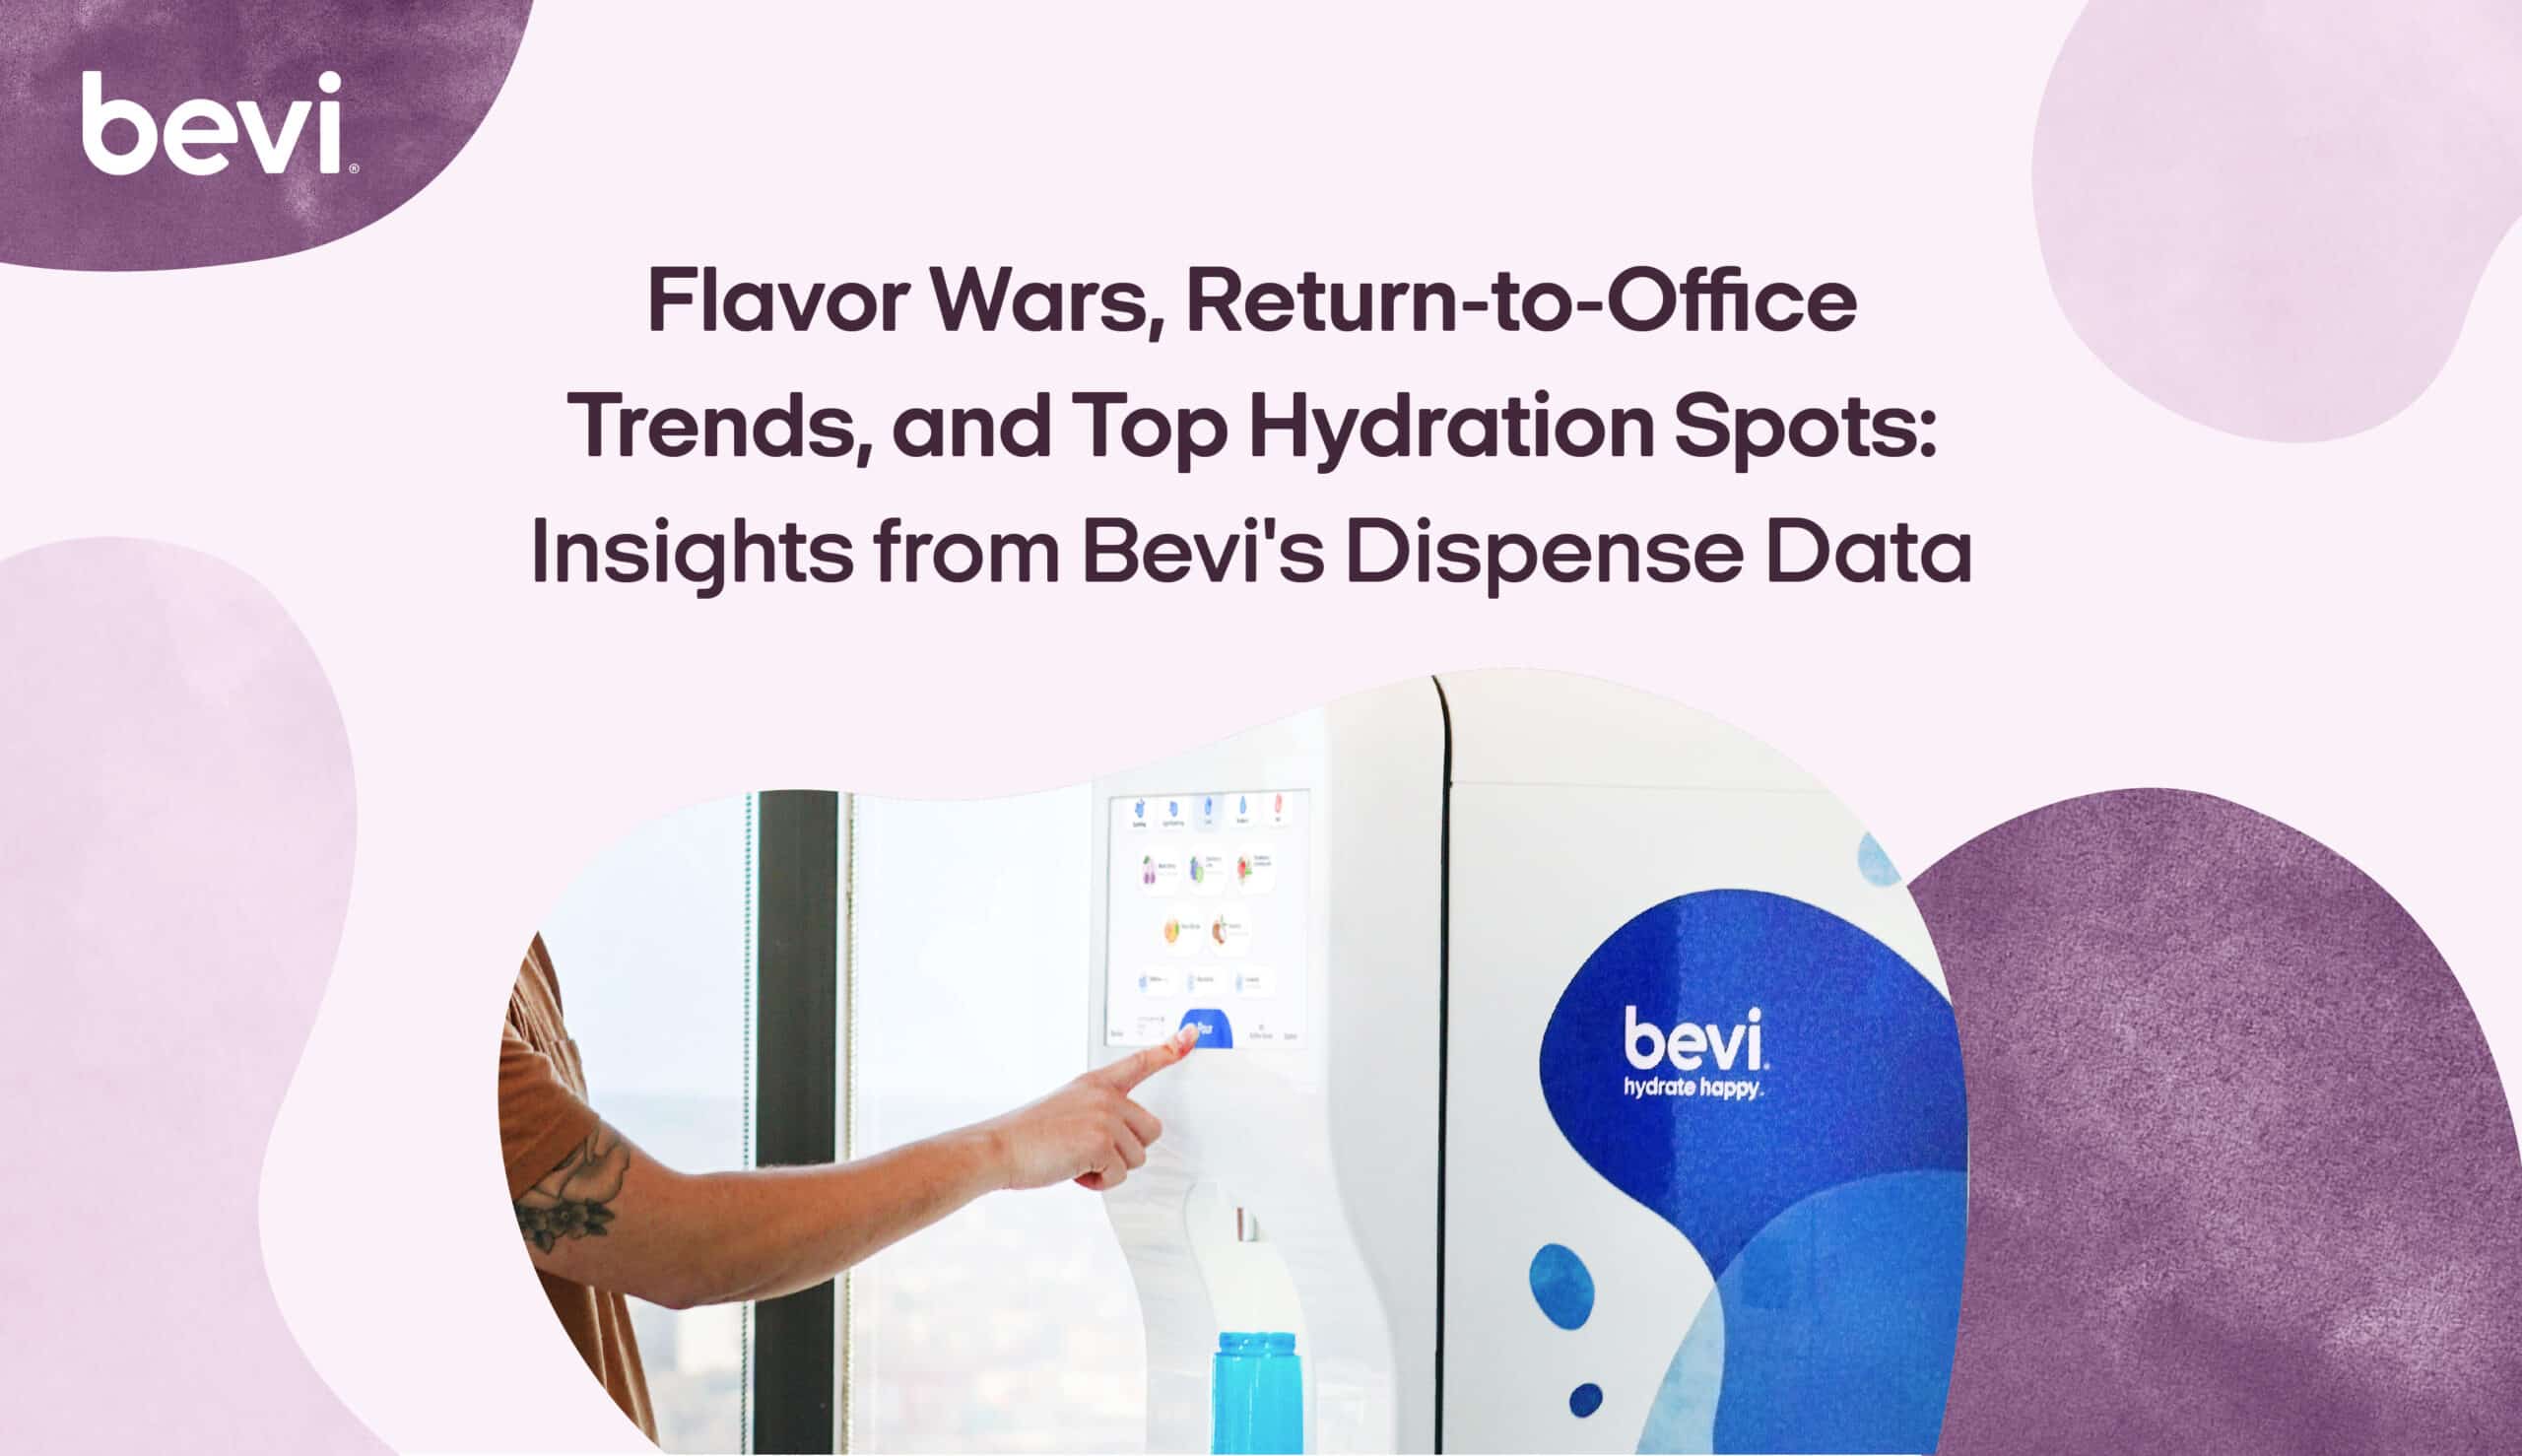 Flavor Wars, Return-to-Office Trends, and Top Hydration Spots: Insights from Bevi Dispense Data